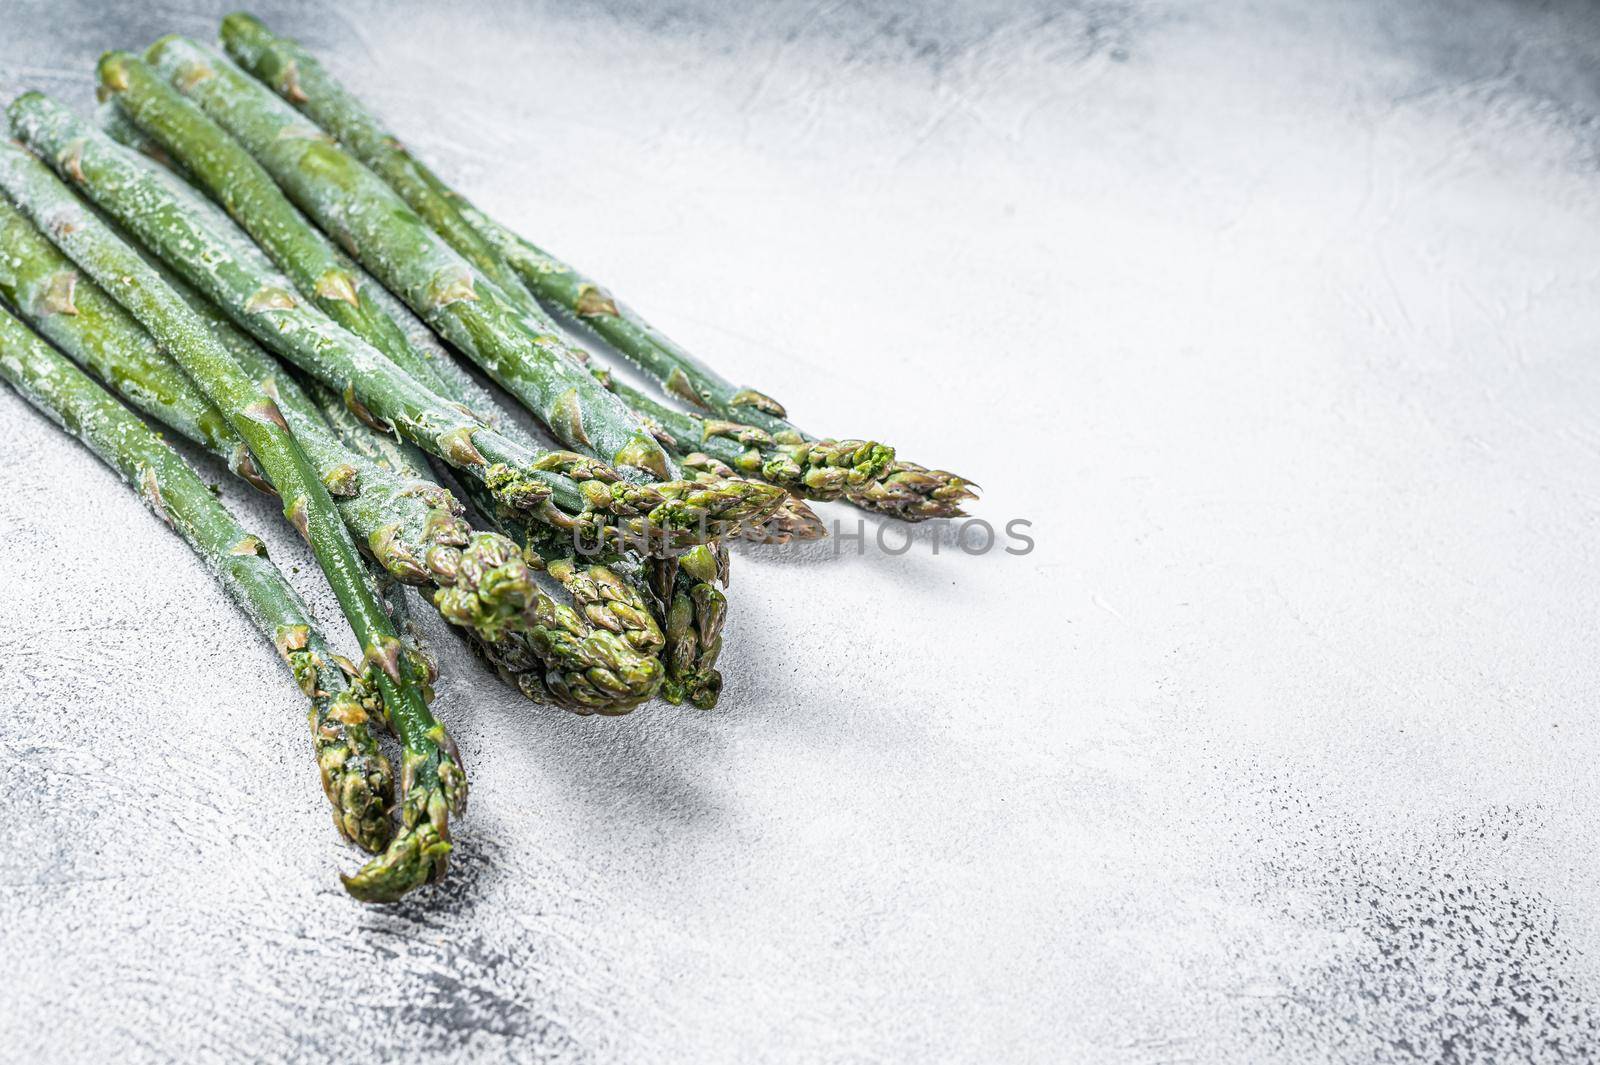 Frozen cold asparagus on a old kitchen table. White background. Top view. Copy space.